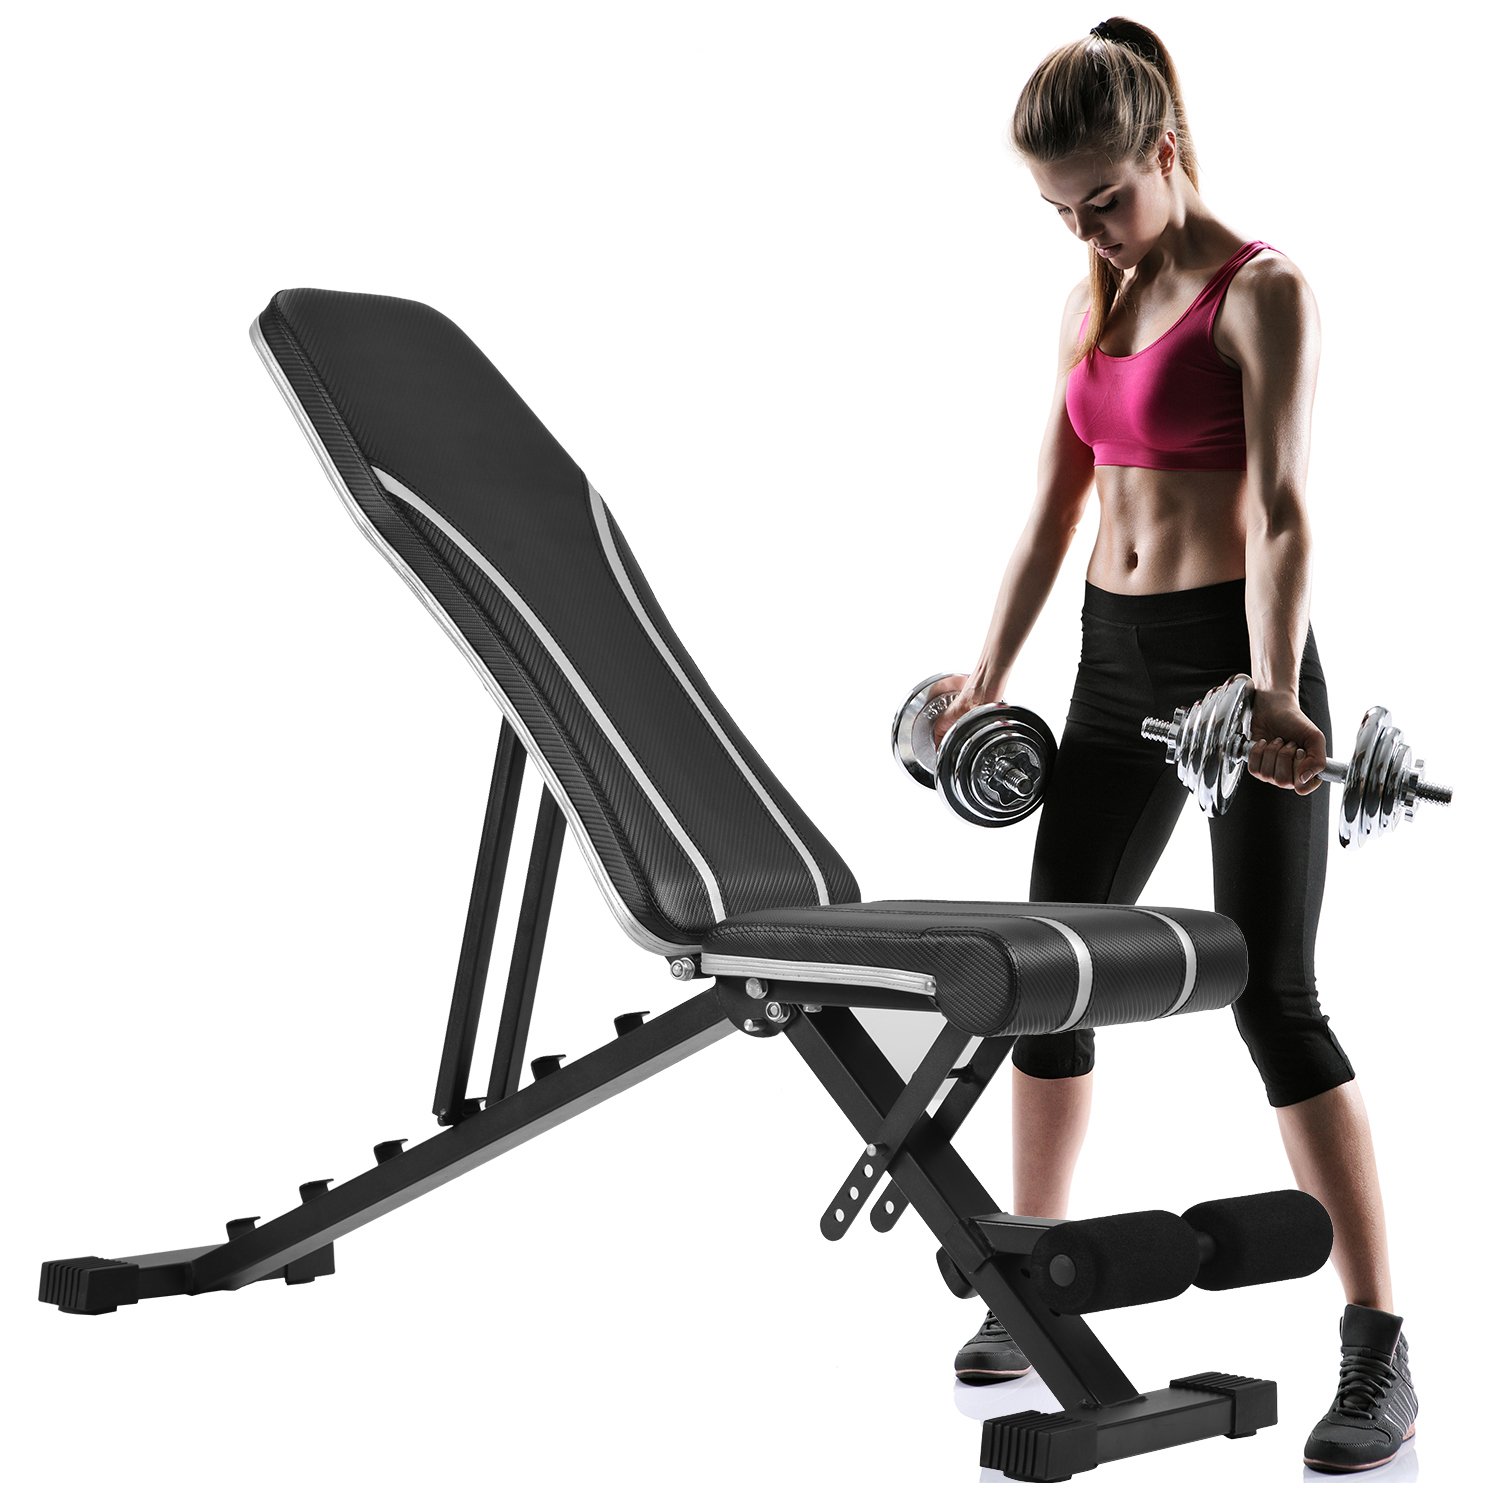 15 Minute Workout Bench Small with Comfort Workout Clothes